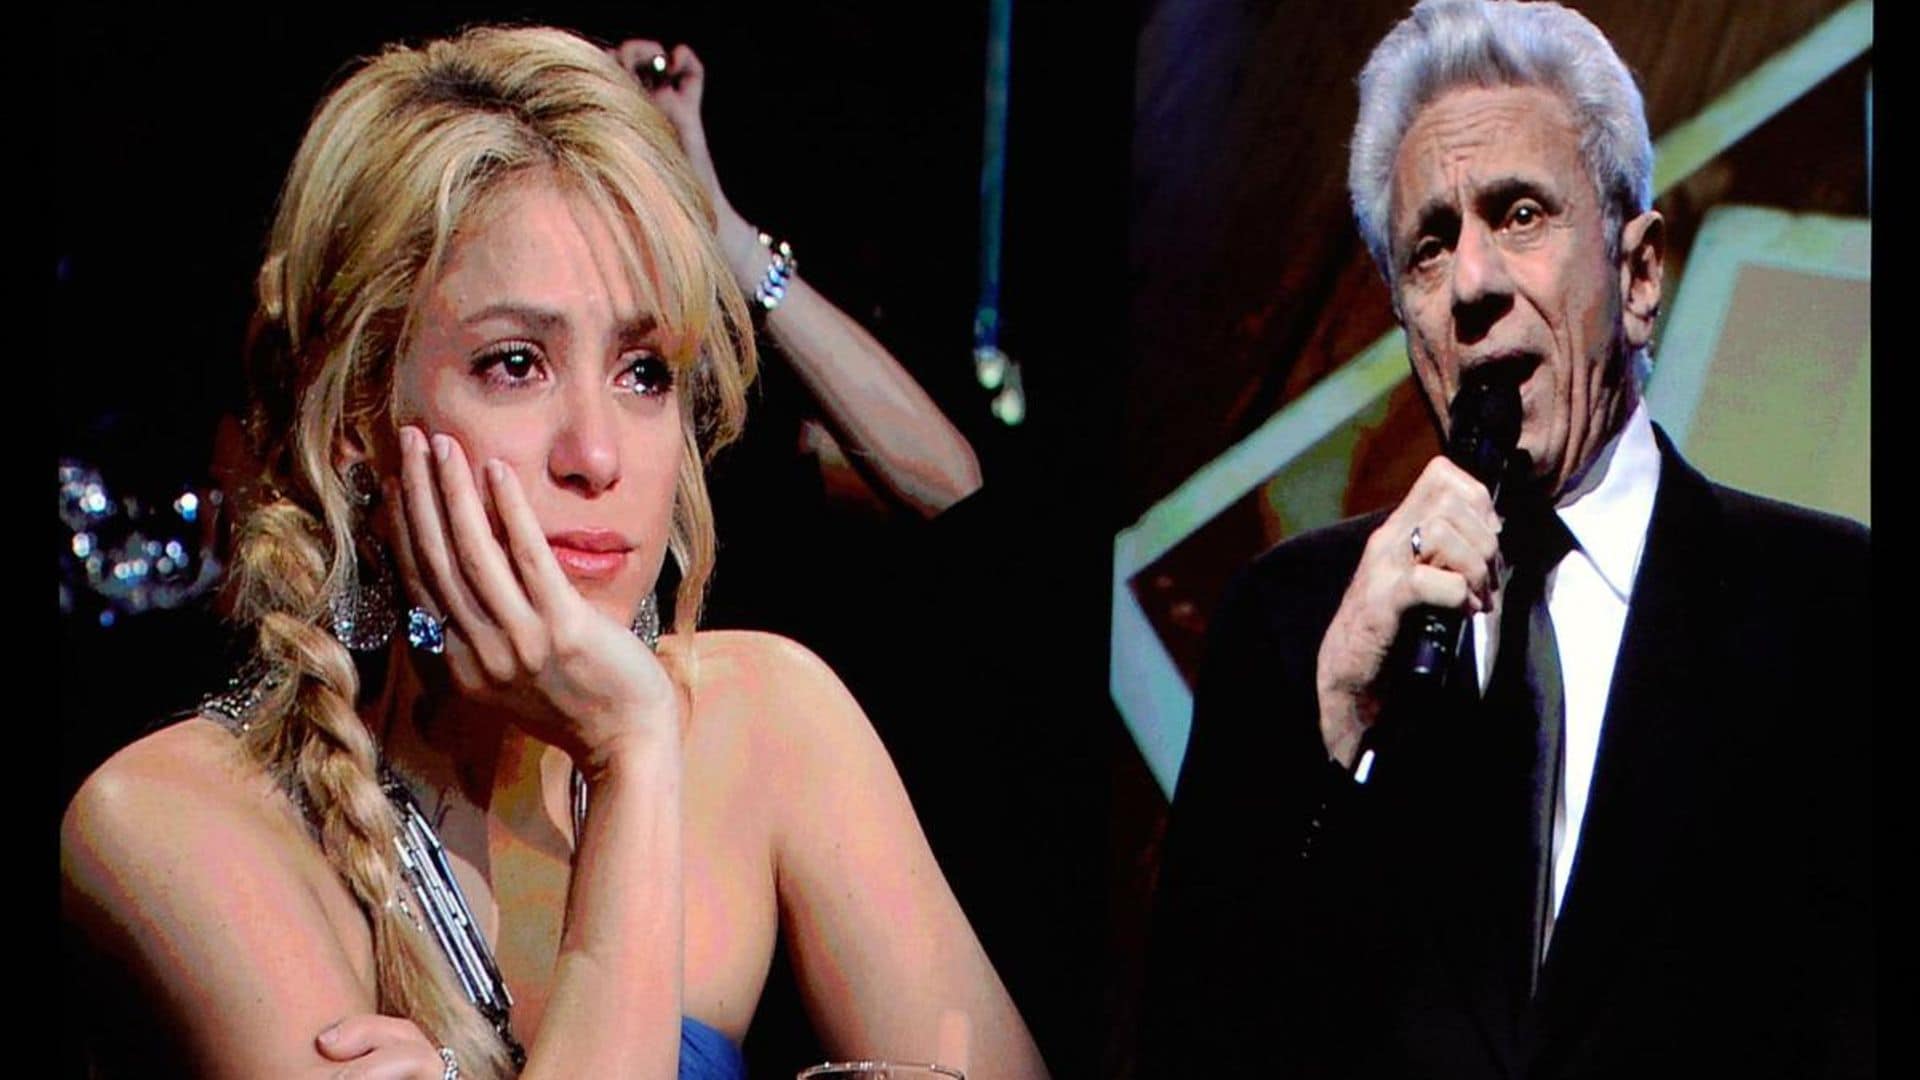 Shakira is reportedly worried about the health of her father; Mr. William Mebarak will have surgery in Barcelona